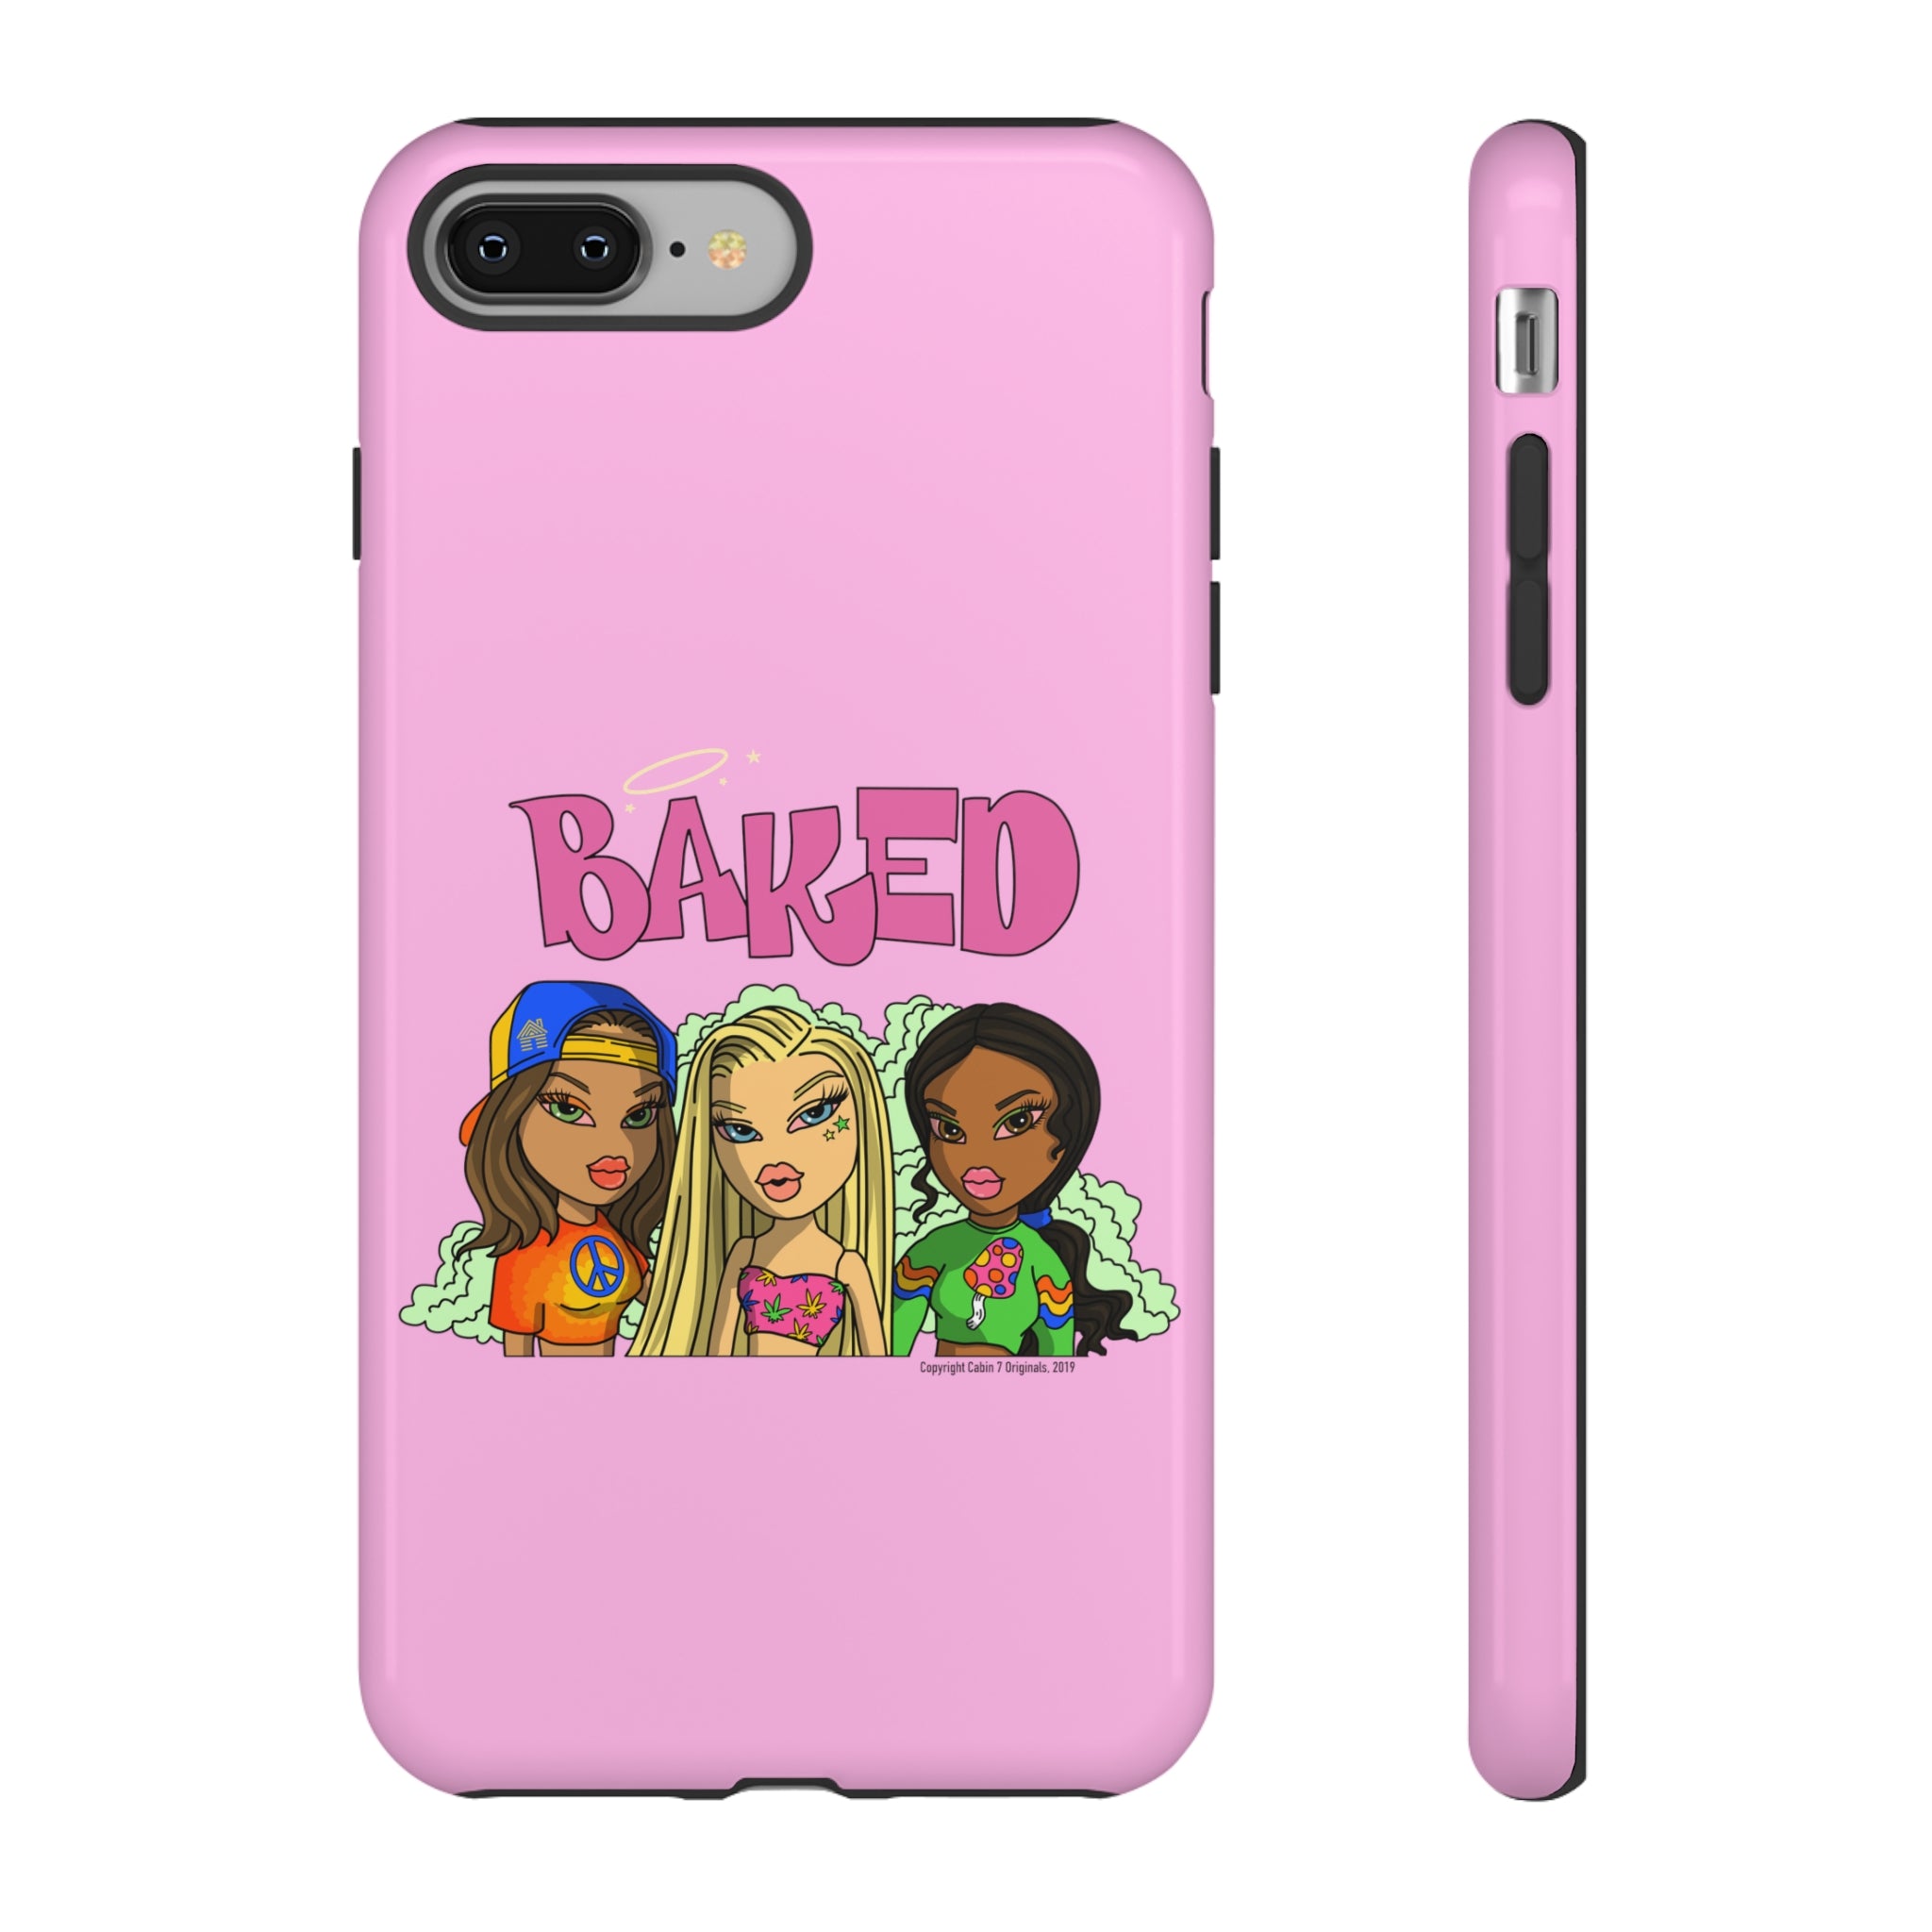 Baked Babes Phone Case